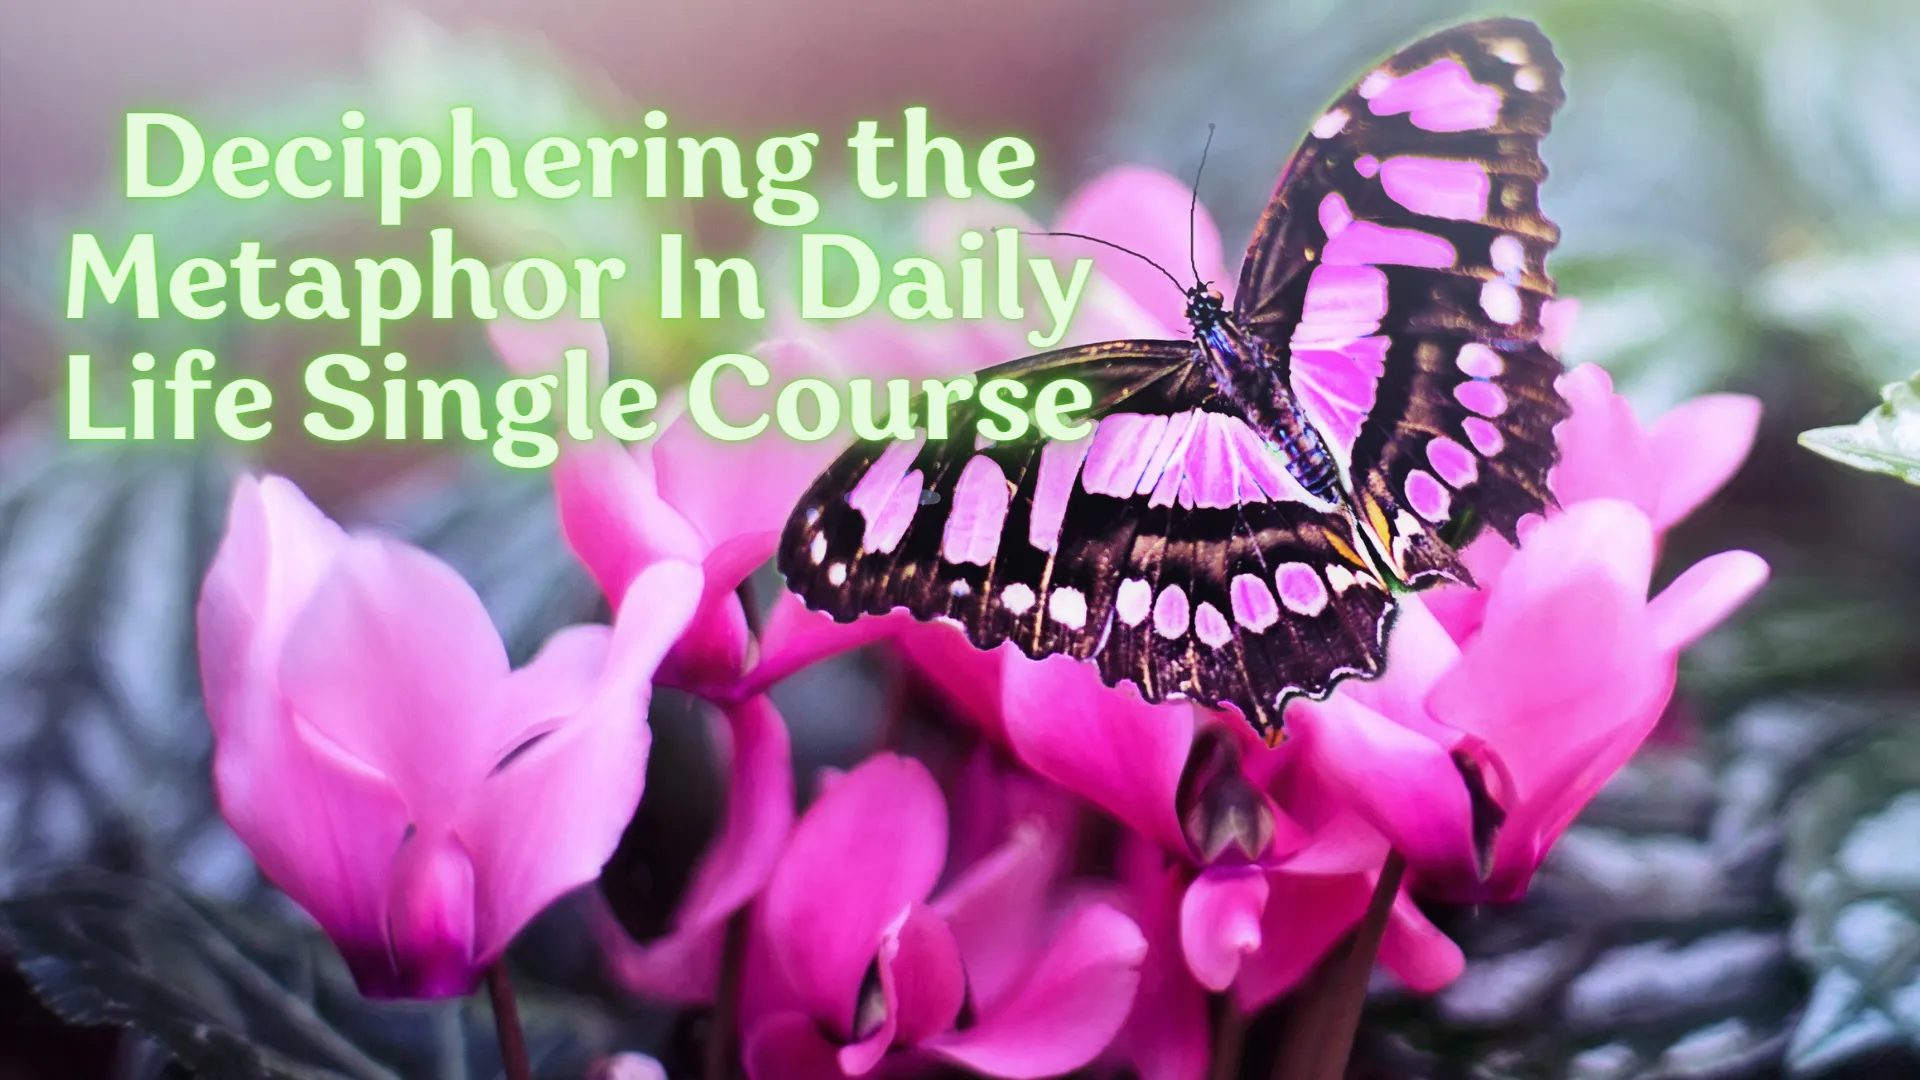 Deciphering the Metaphor in Daily Life (NEW COURSE)